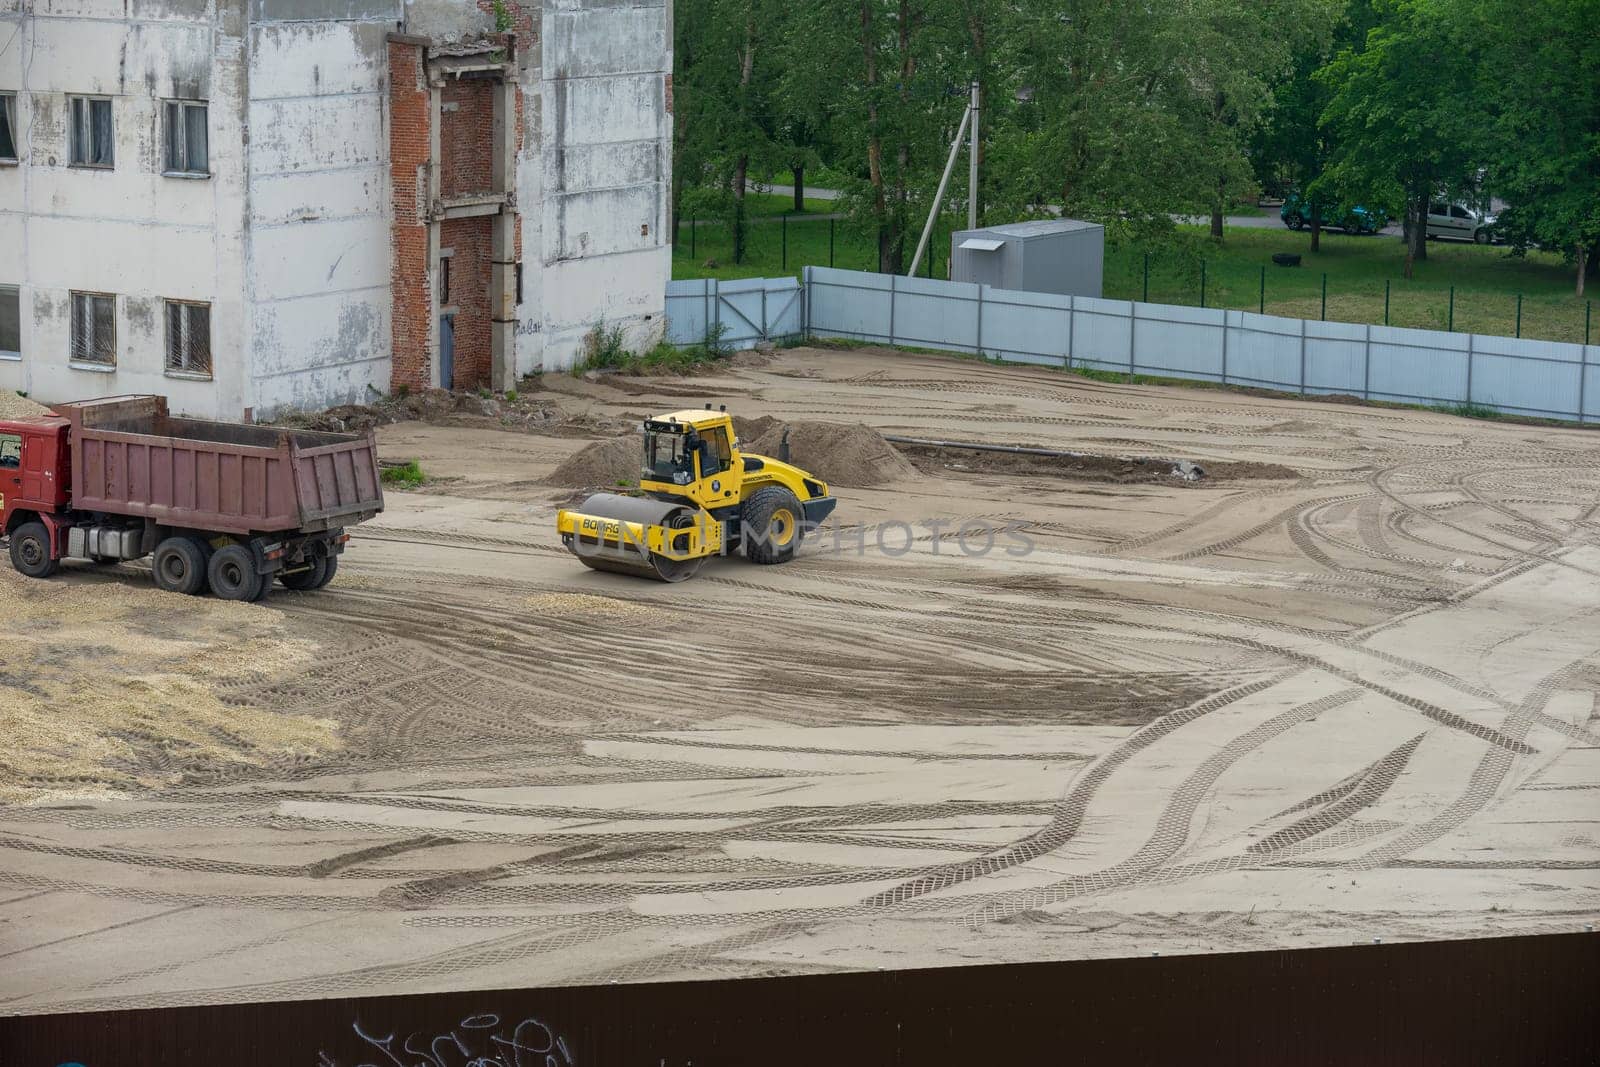 Works road machinery skating rink leveling the sand. High quality photo